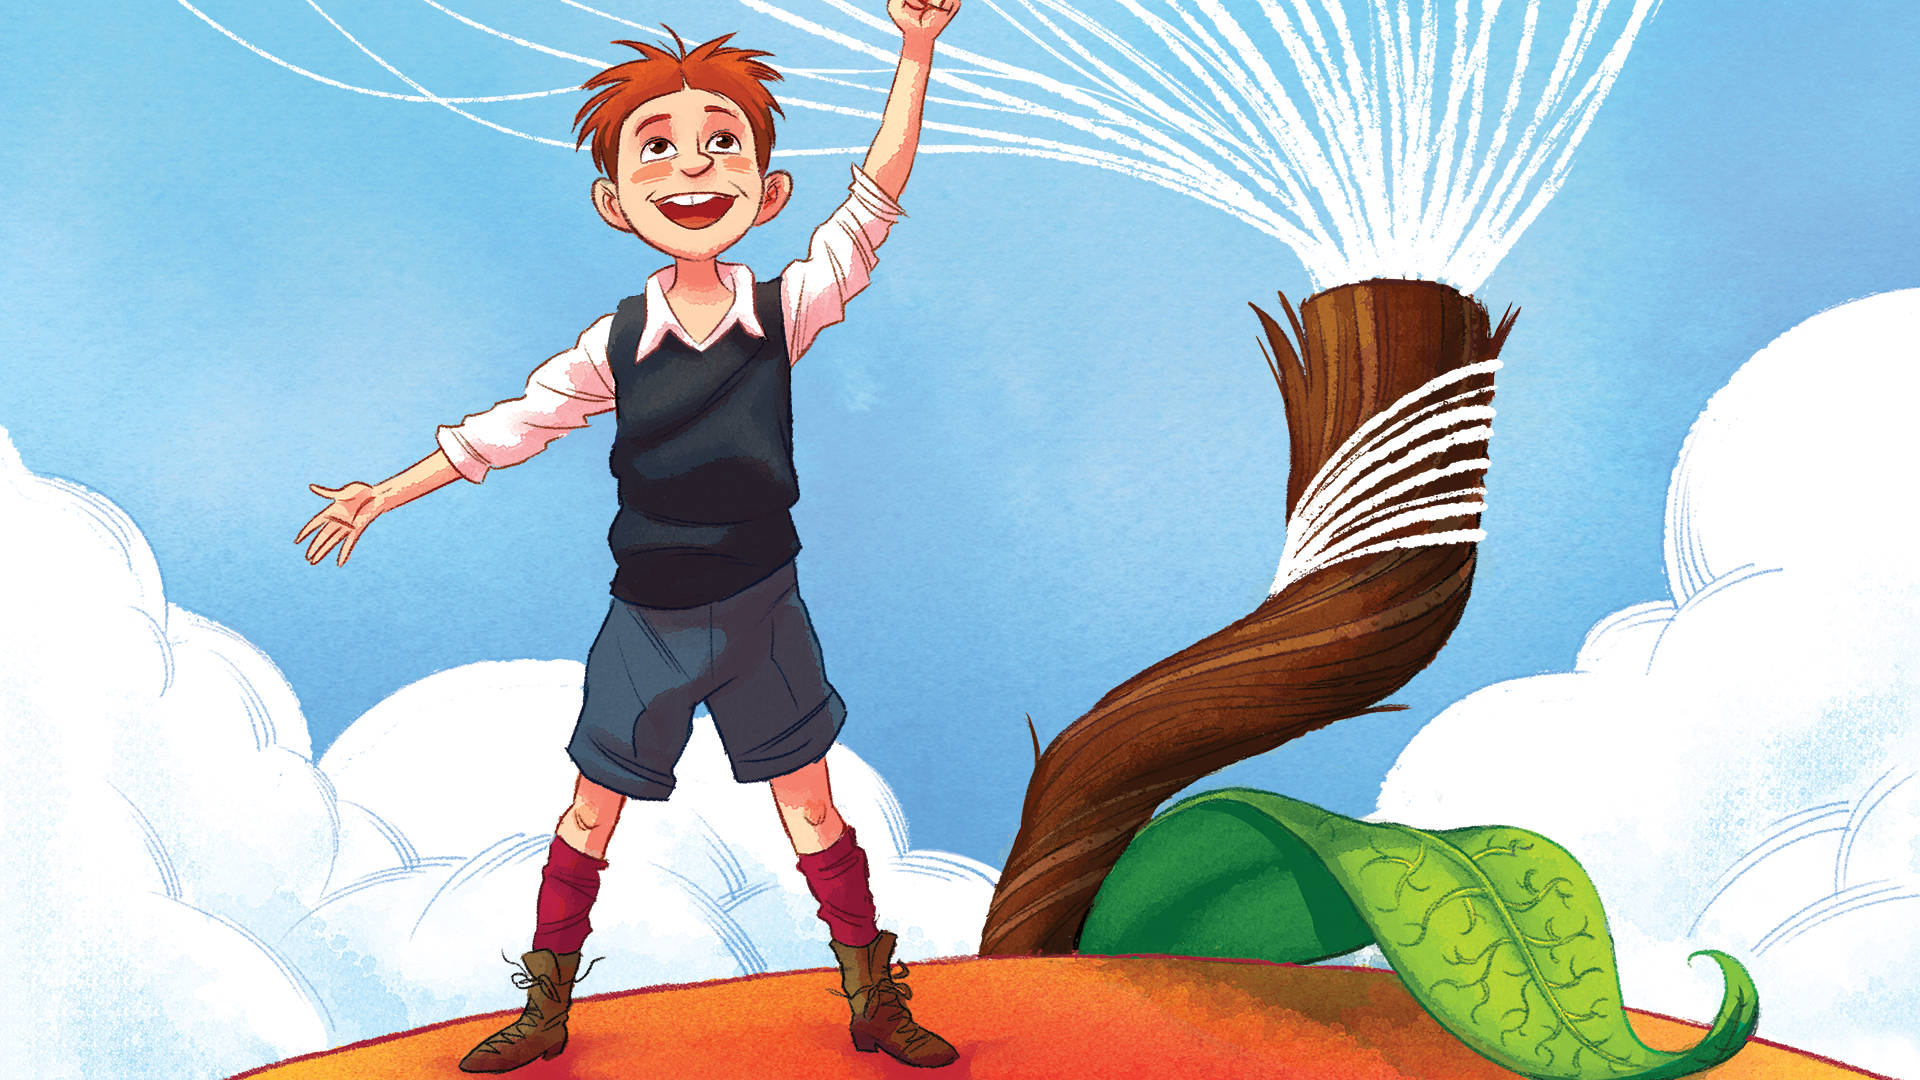 Delightful Adventure With James And The Giant Peach